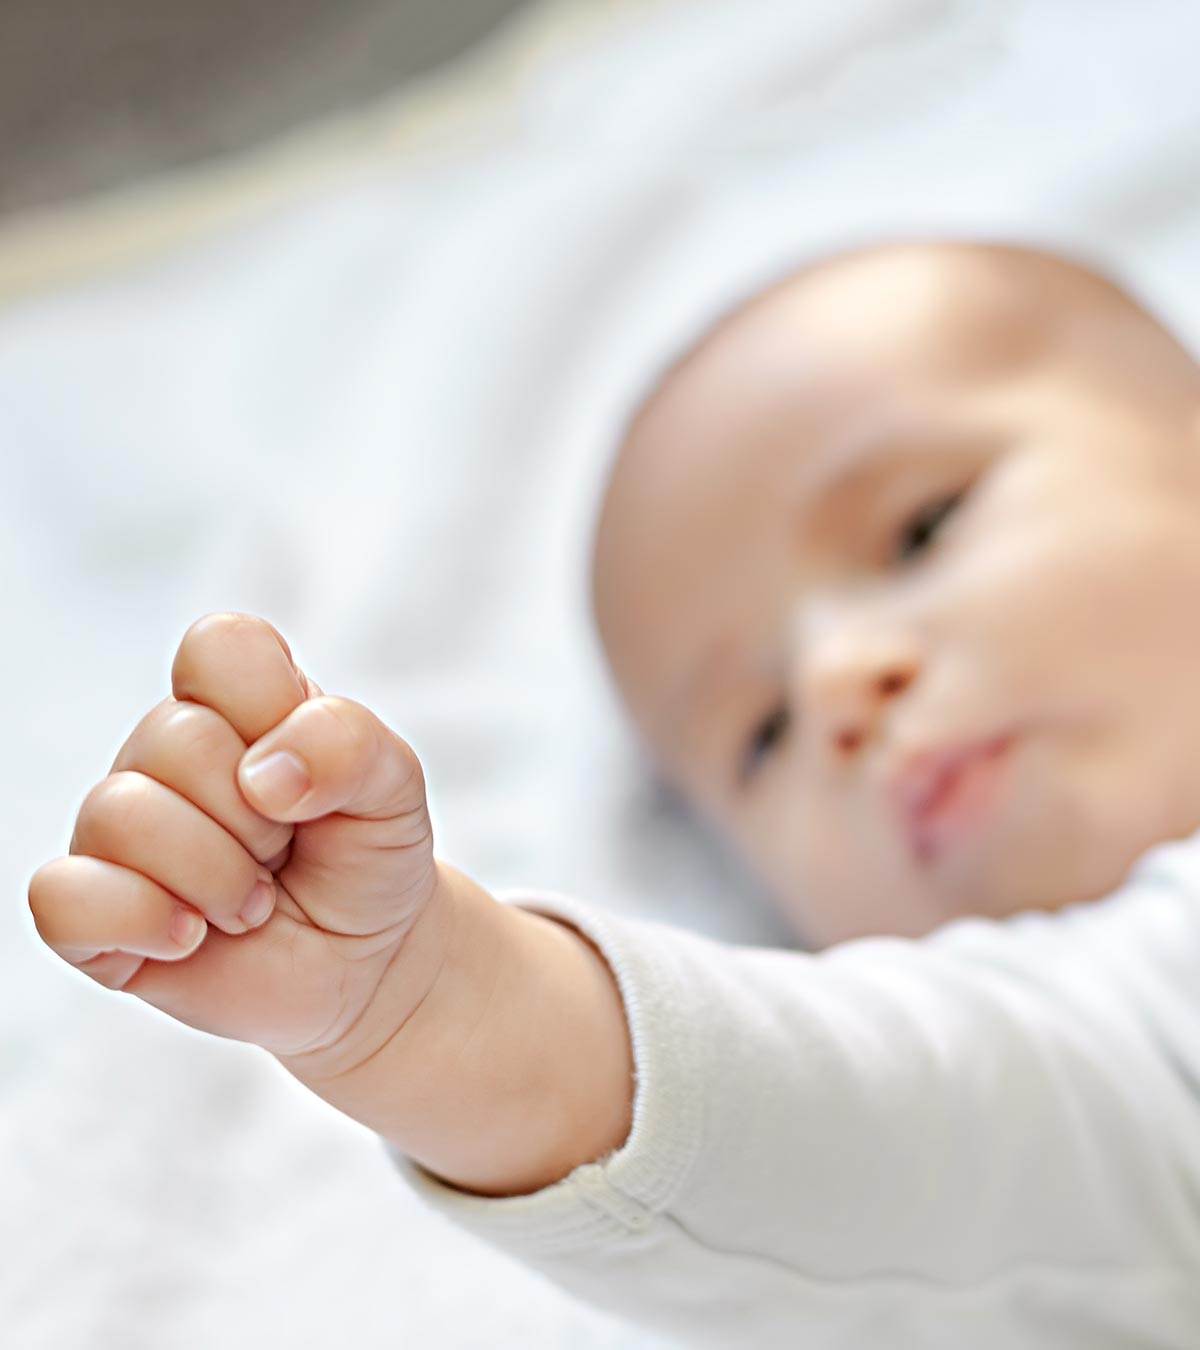 163 Strong And Powerful Baby Boy Names With Meanings